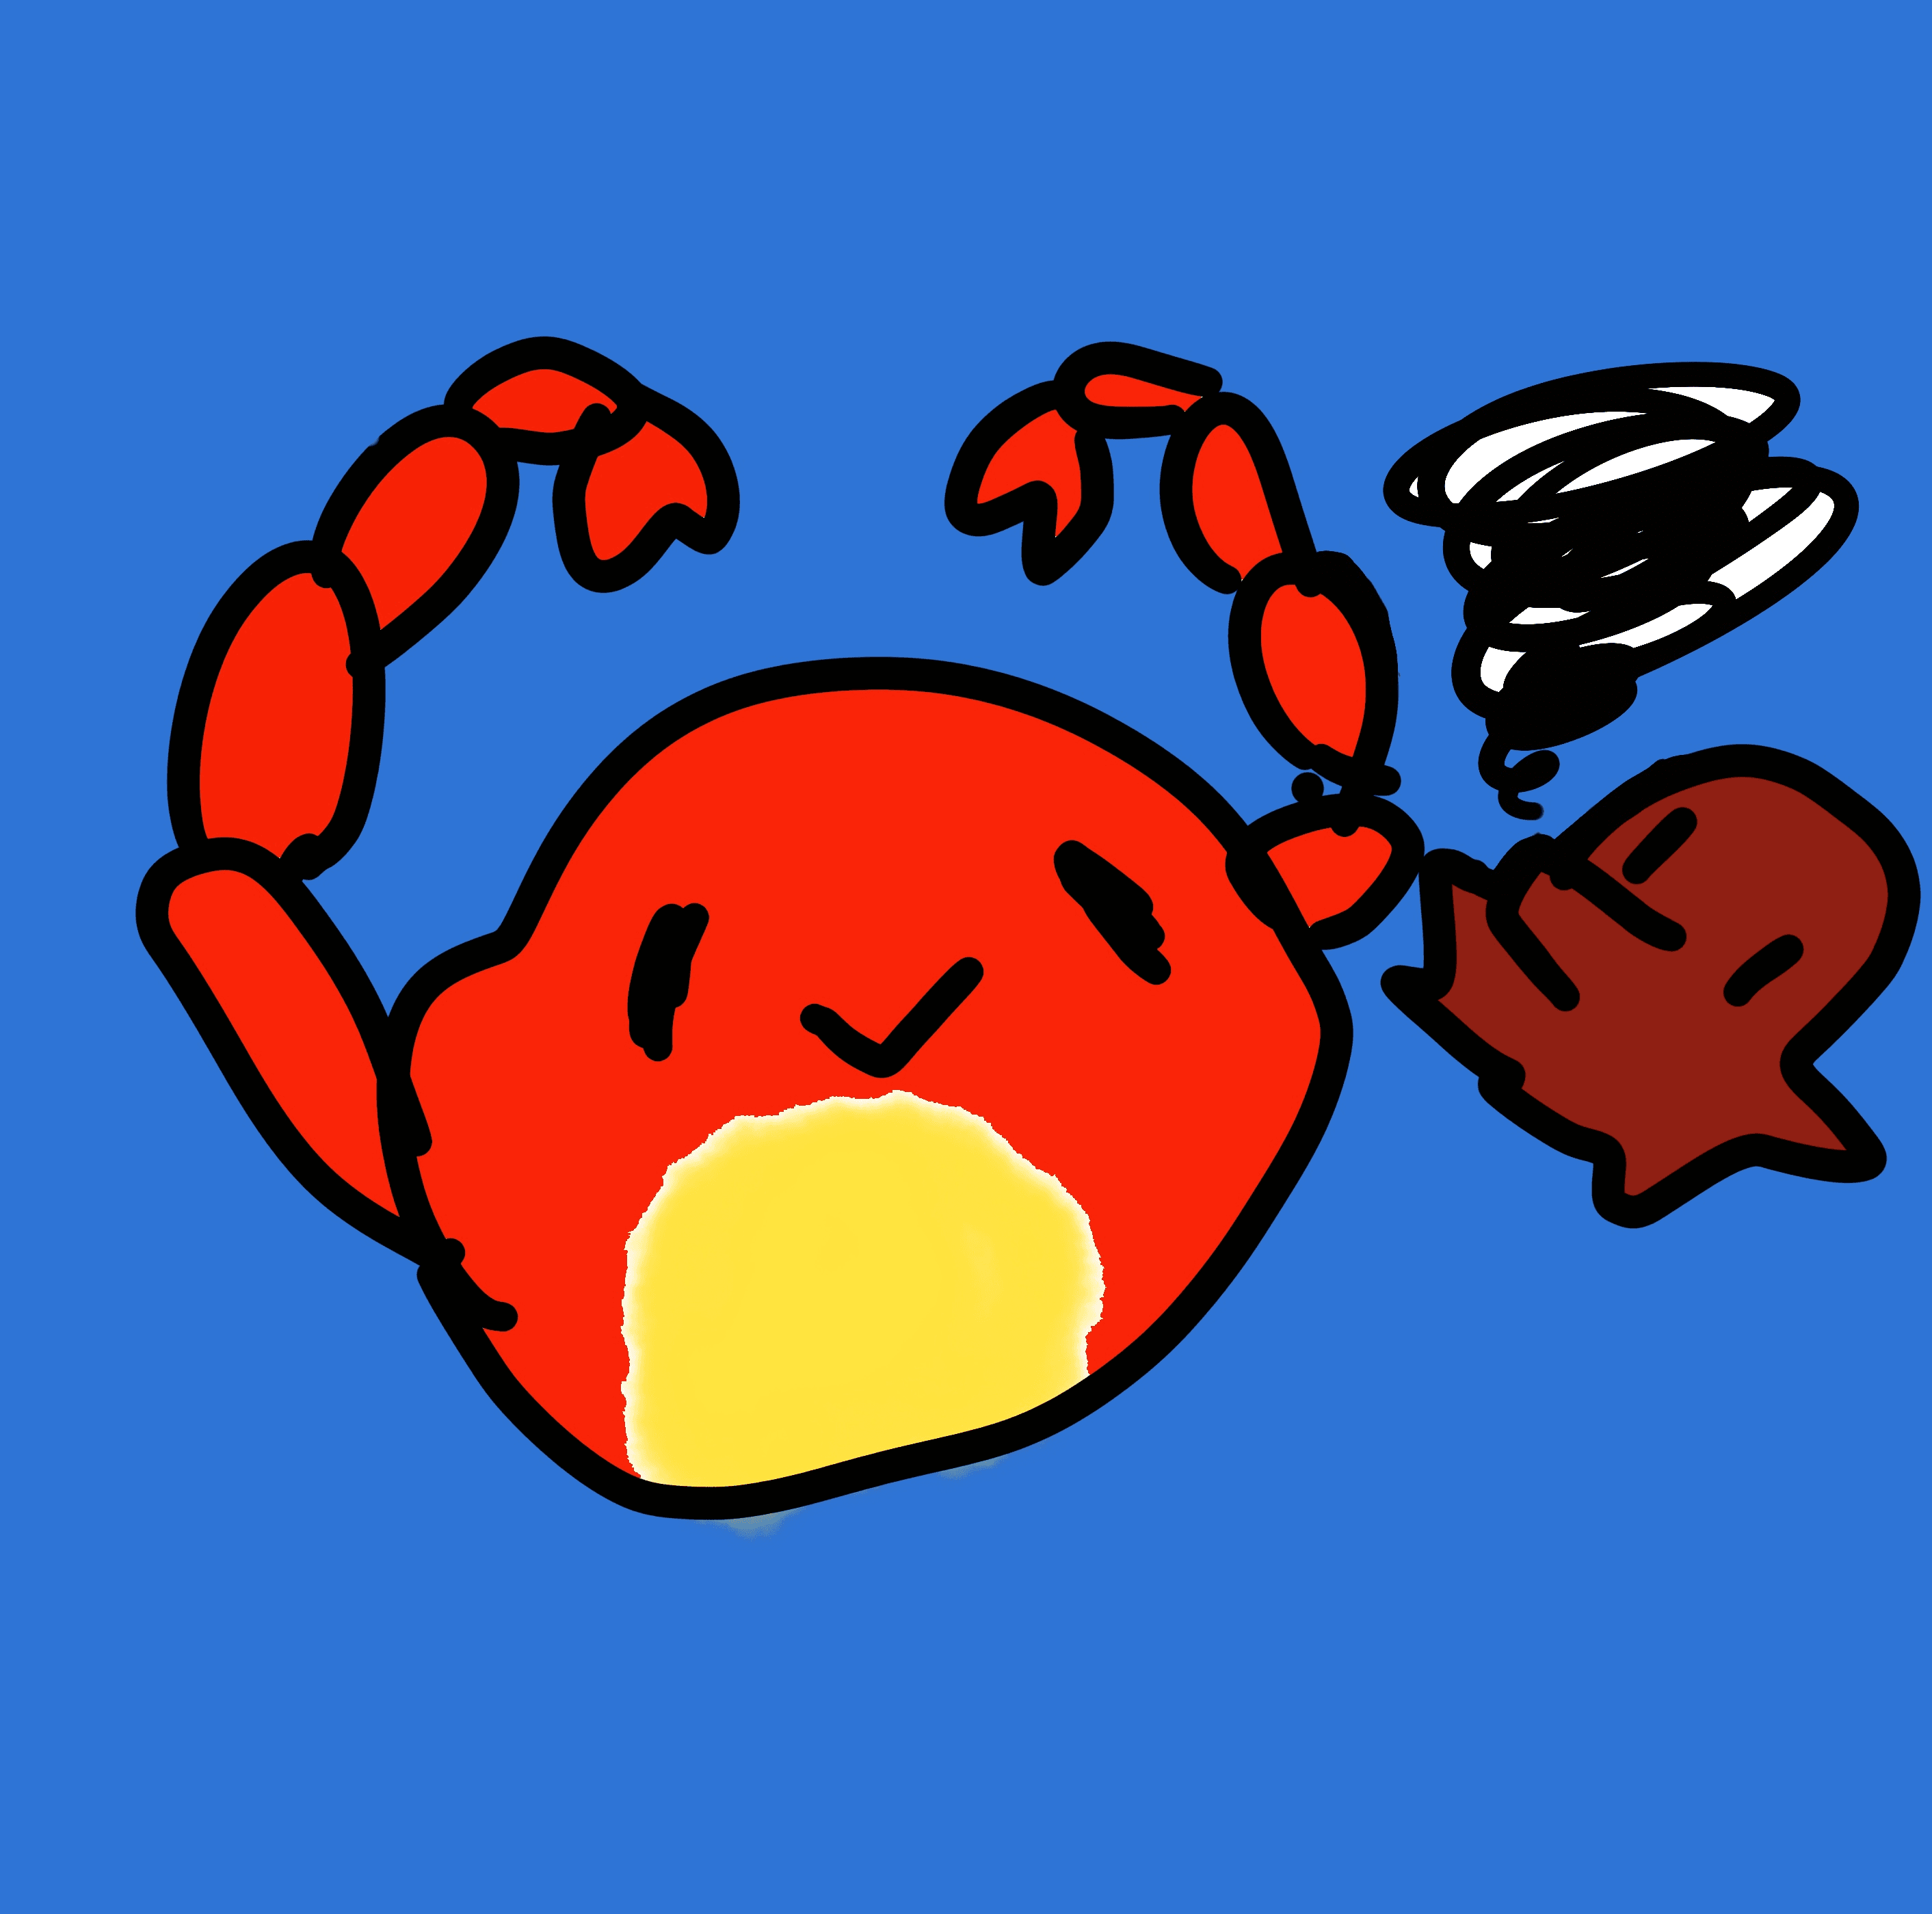 A Crab and a Octopus